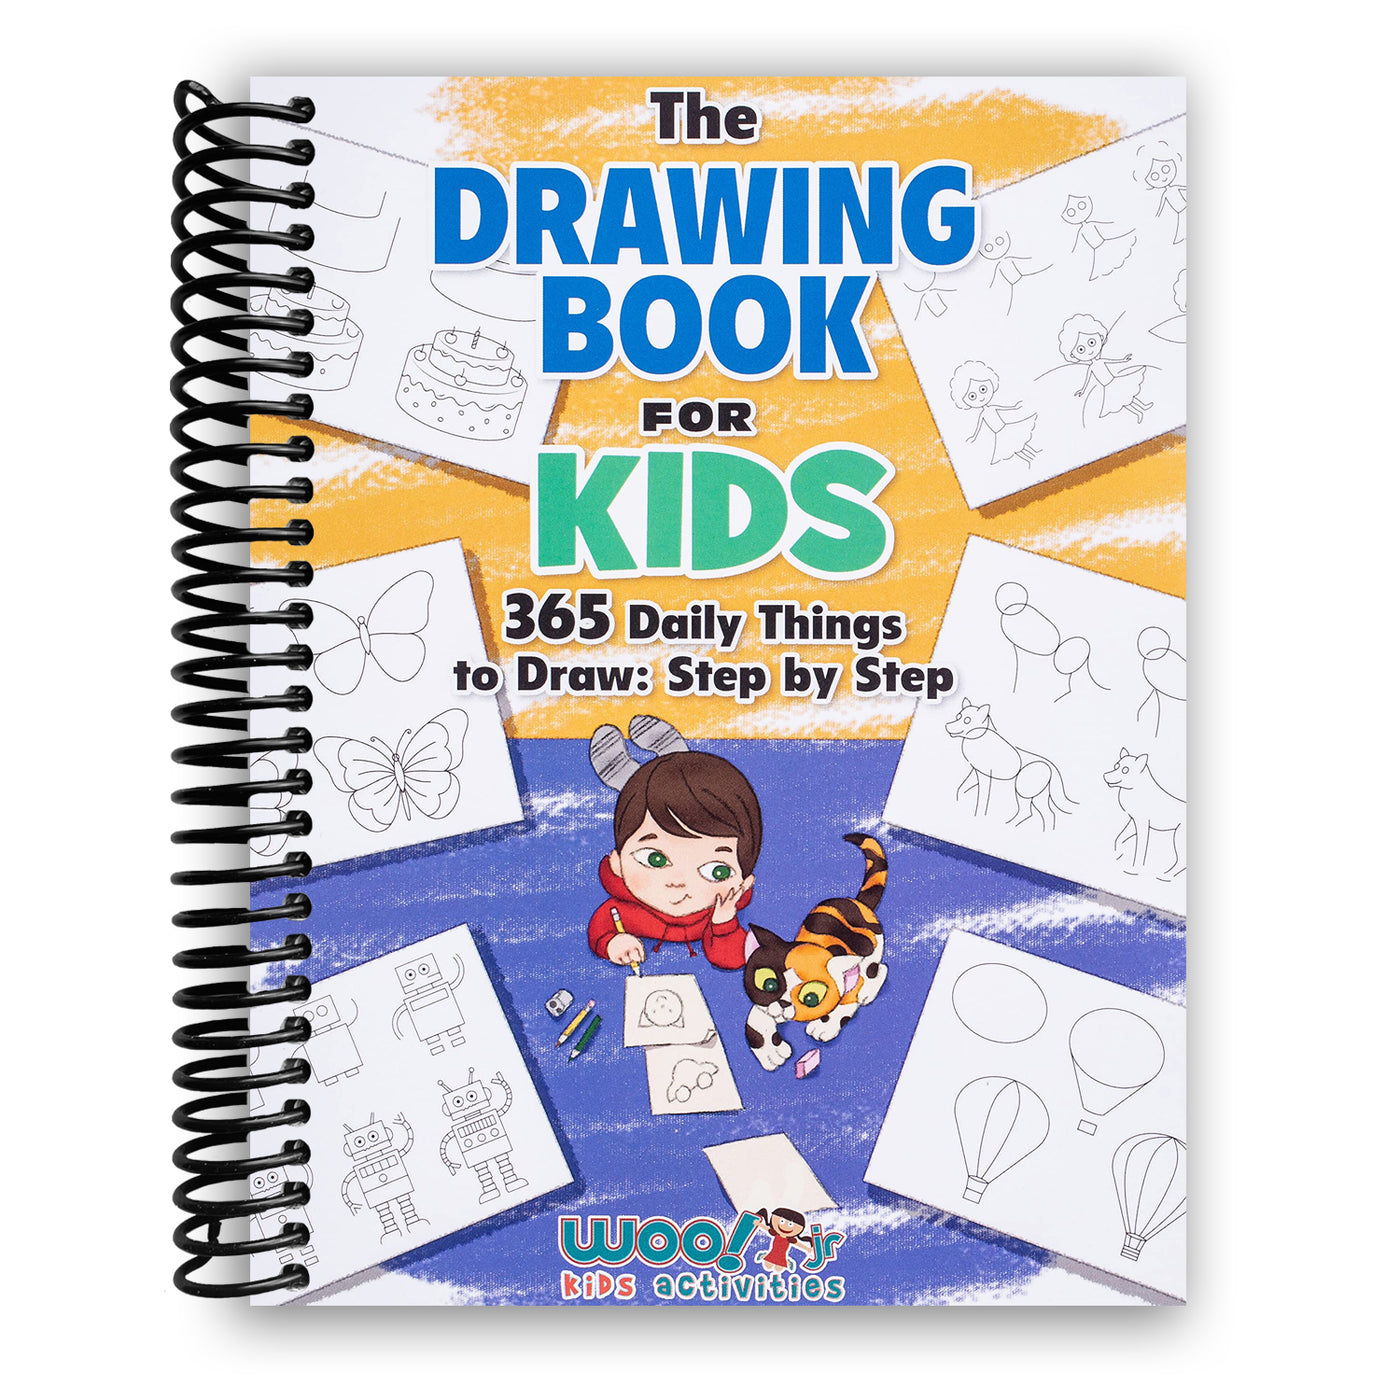 How To Draw Books For Kids 5-7: Easy Step-by-Step Drawing and Activity Book  for Kids to Learn to Draw Cute Stuff